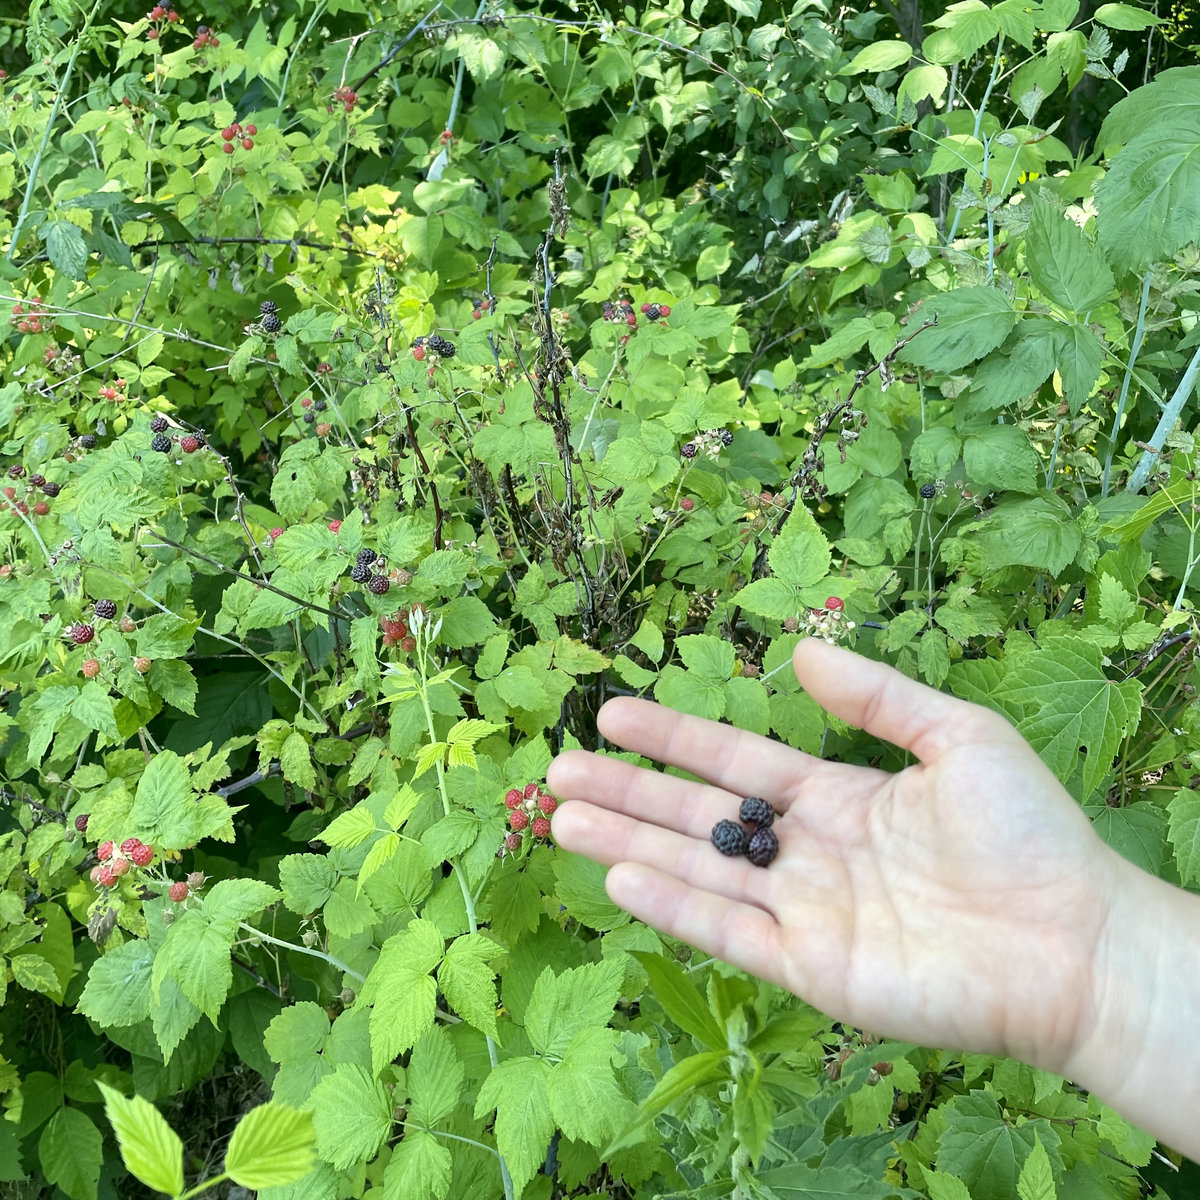 a slightly out-of-focus hand gingerly holds three tiny black raspberries in front of an extremely vibrant green berry patch encountered in the woods